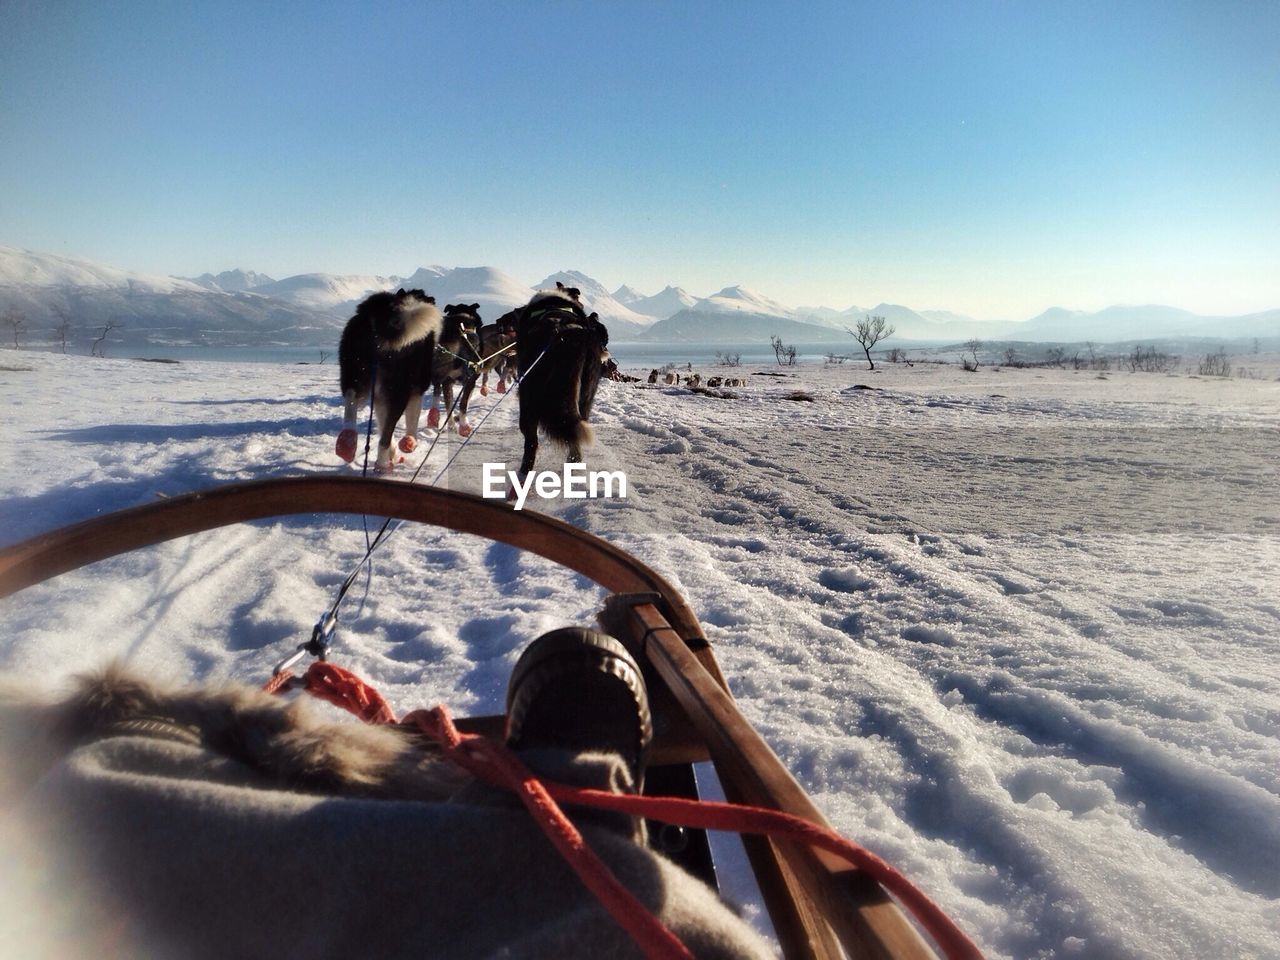 Horses pulling cropped carriage on snow covered landscape